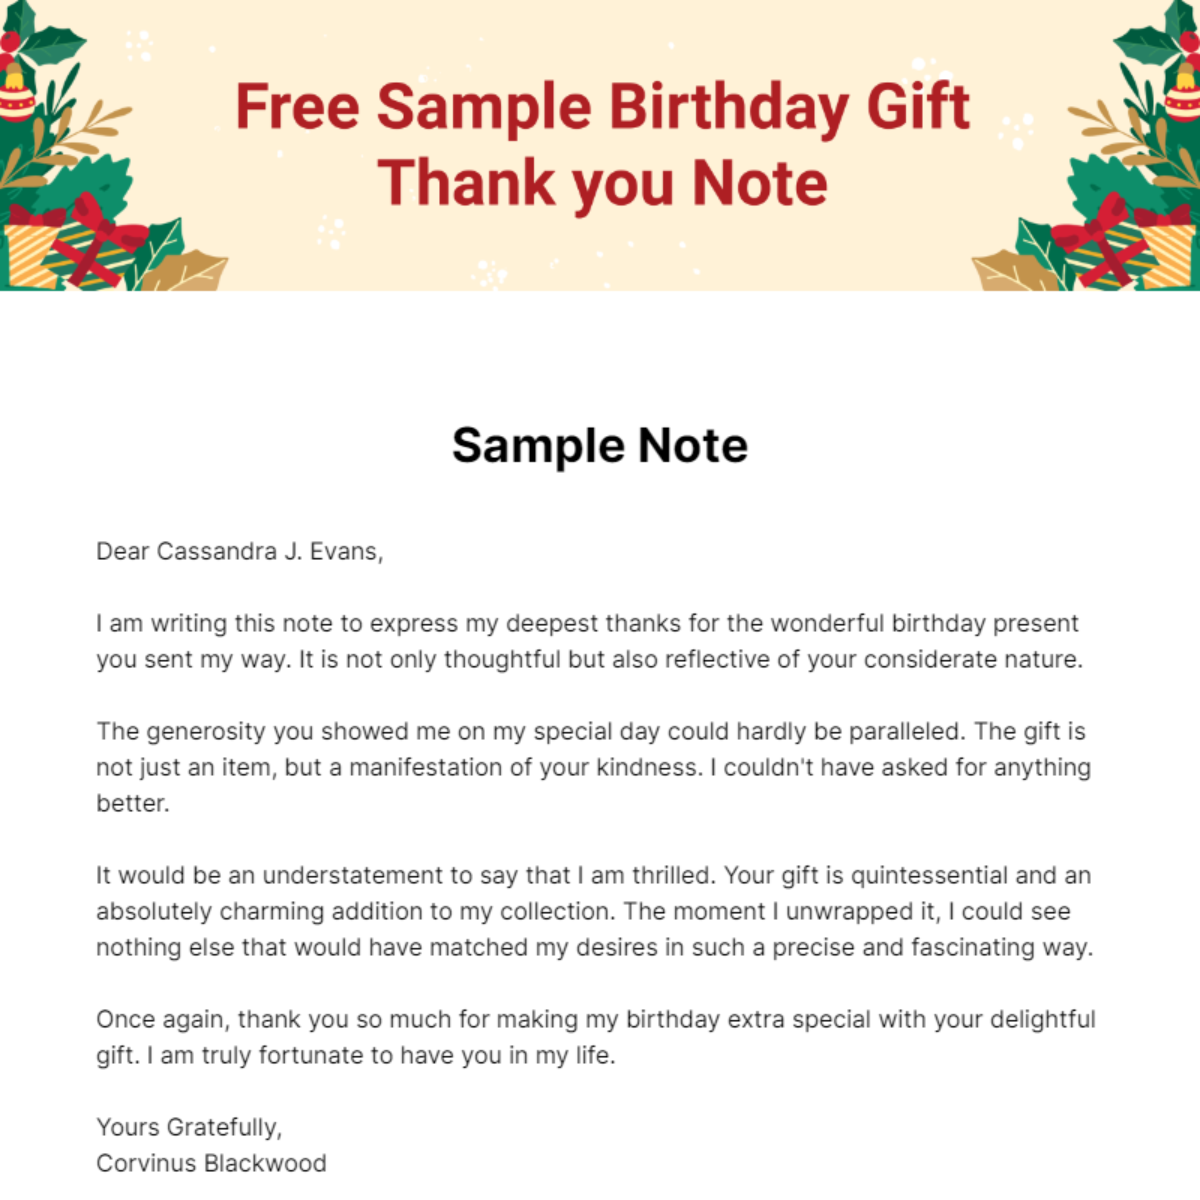 Free Sample Birthday Gift Thank you Note Template